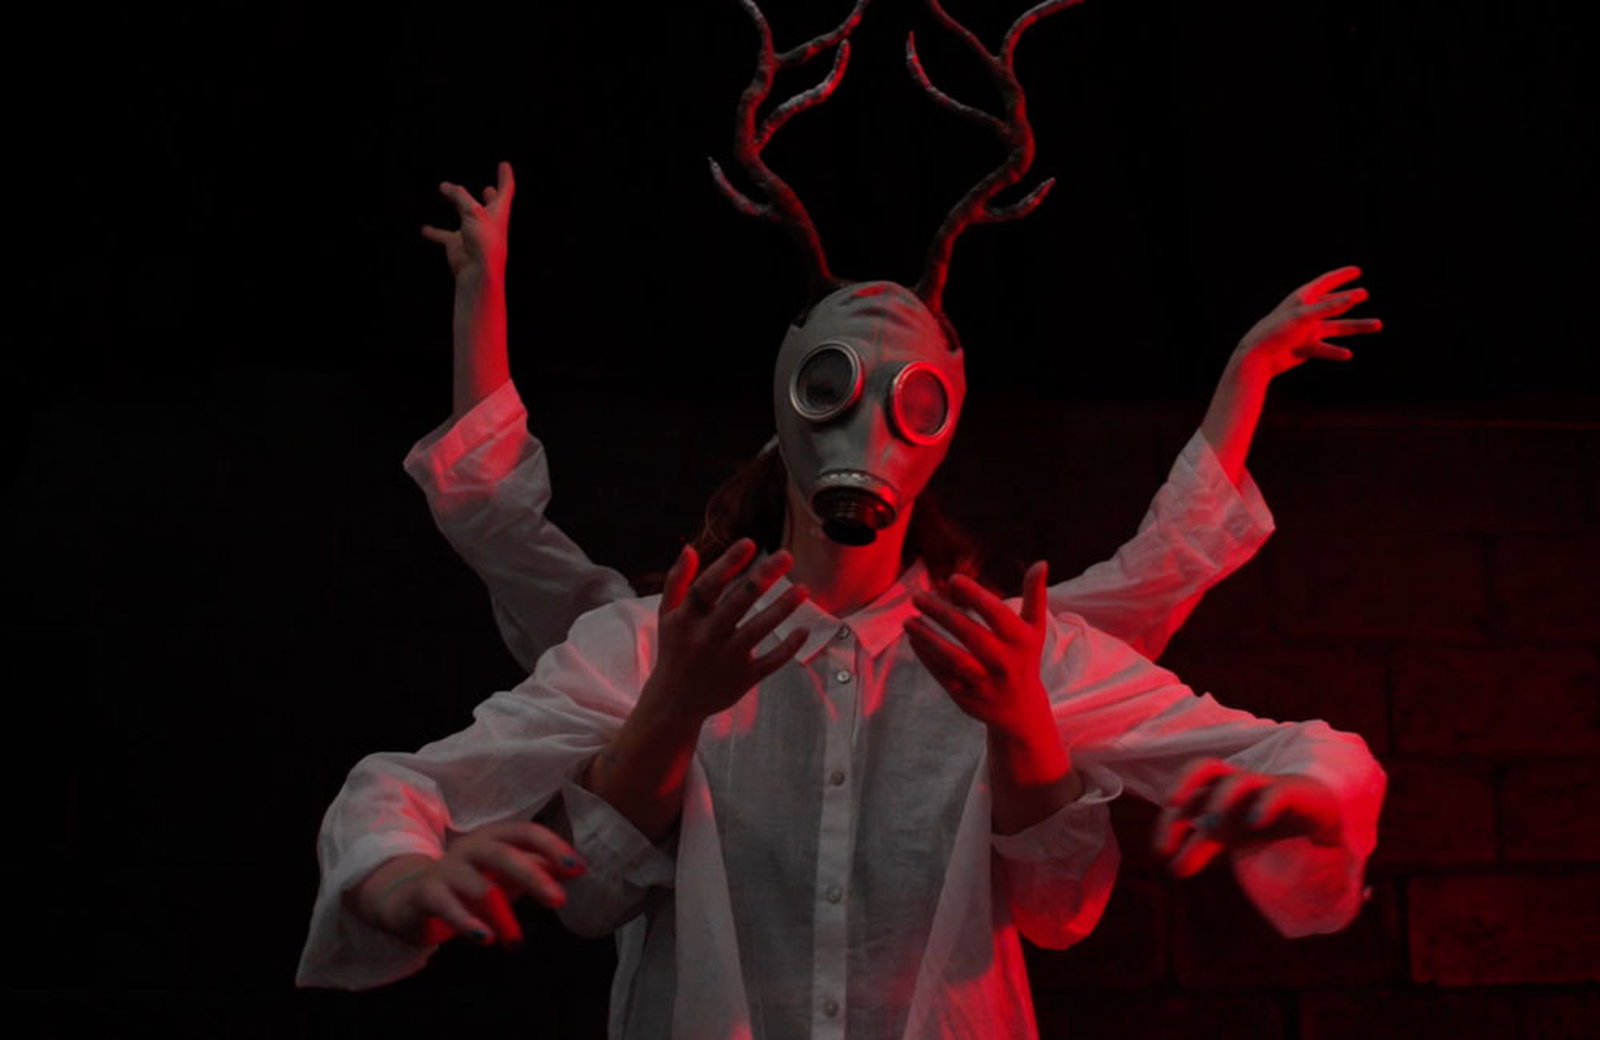 A performer wearing a gas mask under dramatic red lighting. They are wearing deer antlers on their head. Two other performers are using their arms to create the impression that the main perforrmer in multi-limbed.